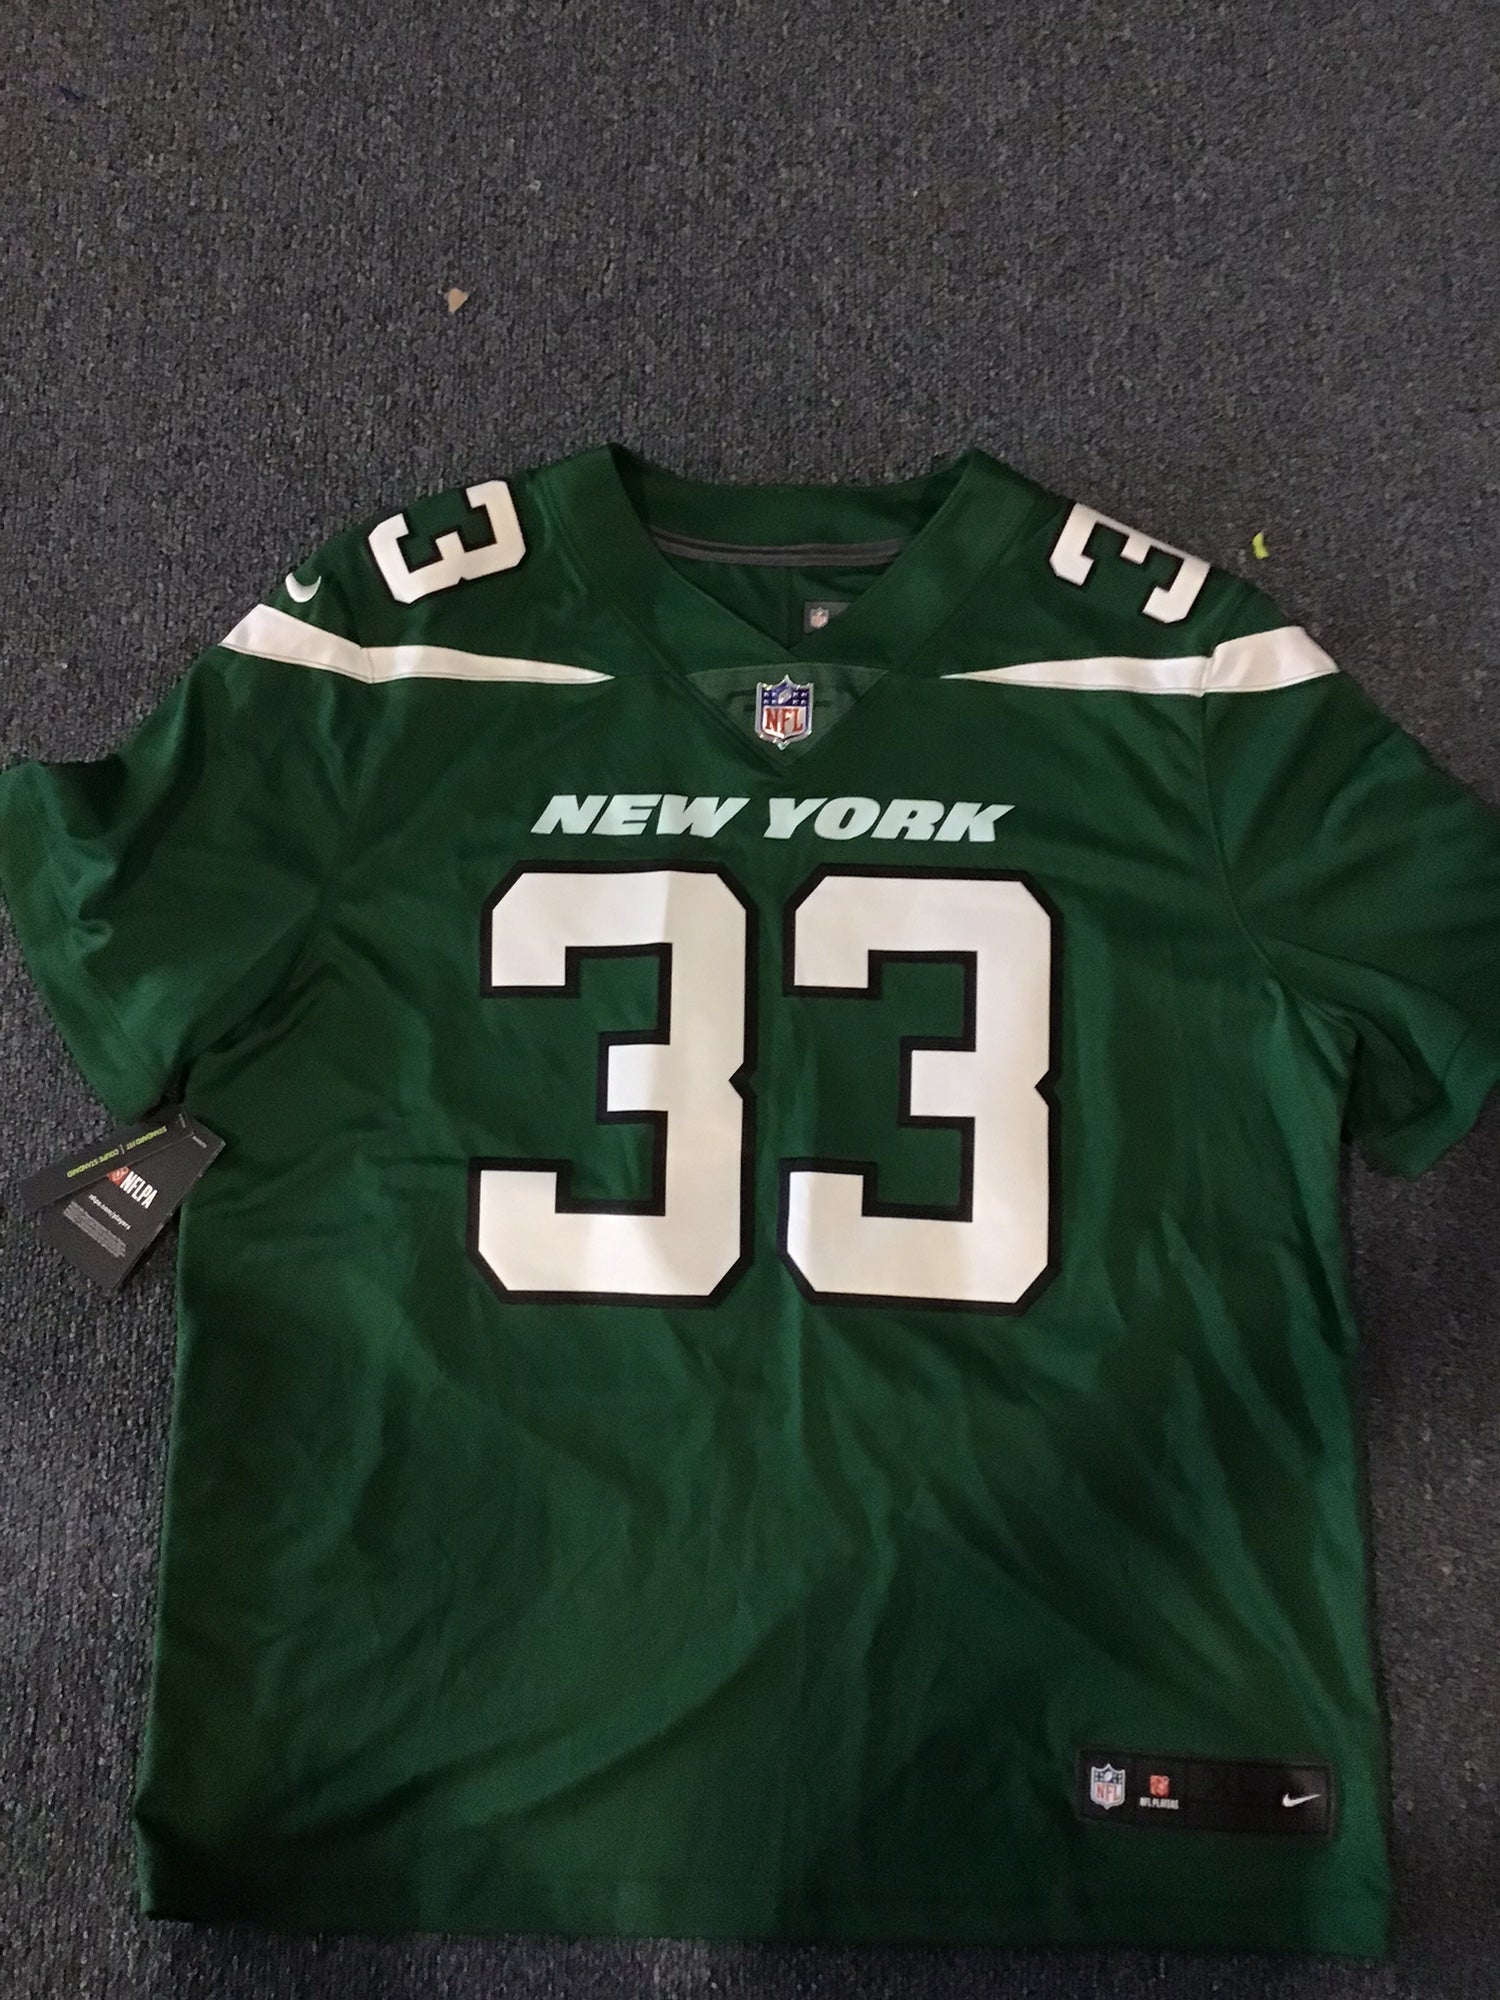 NWT New York Jets Nike On Field Jersey Adams or Darnold